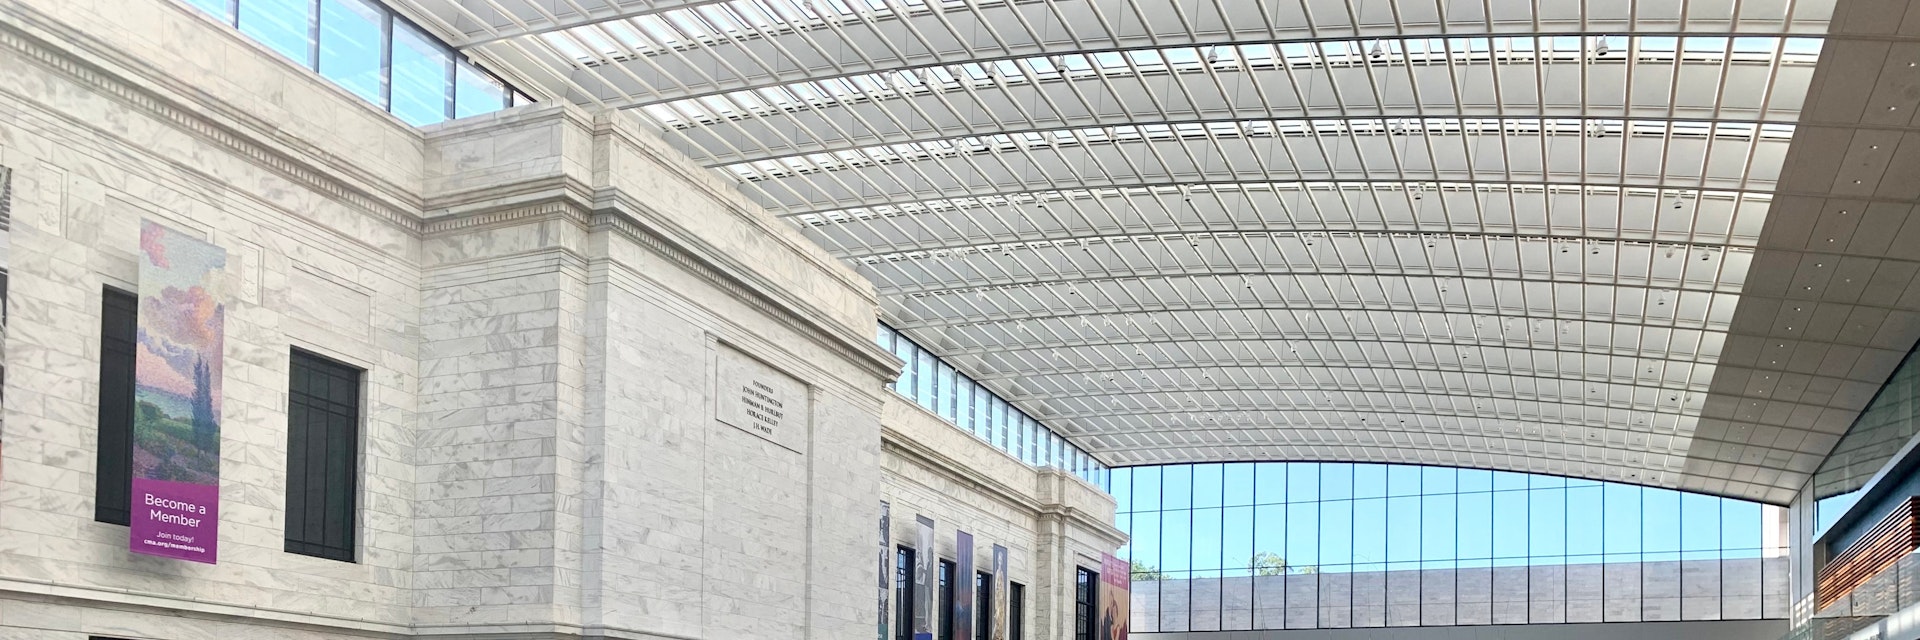 Interior of the Cleveland Museum of Art.